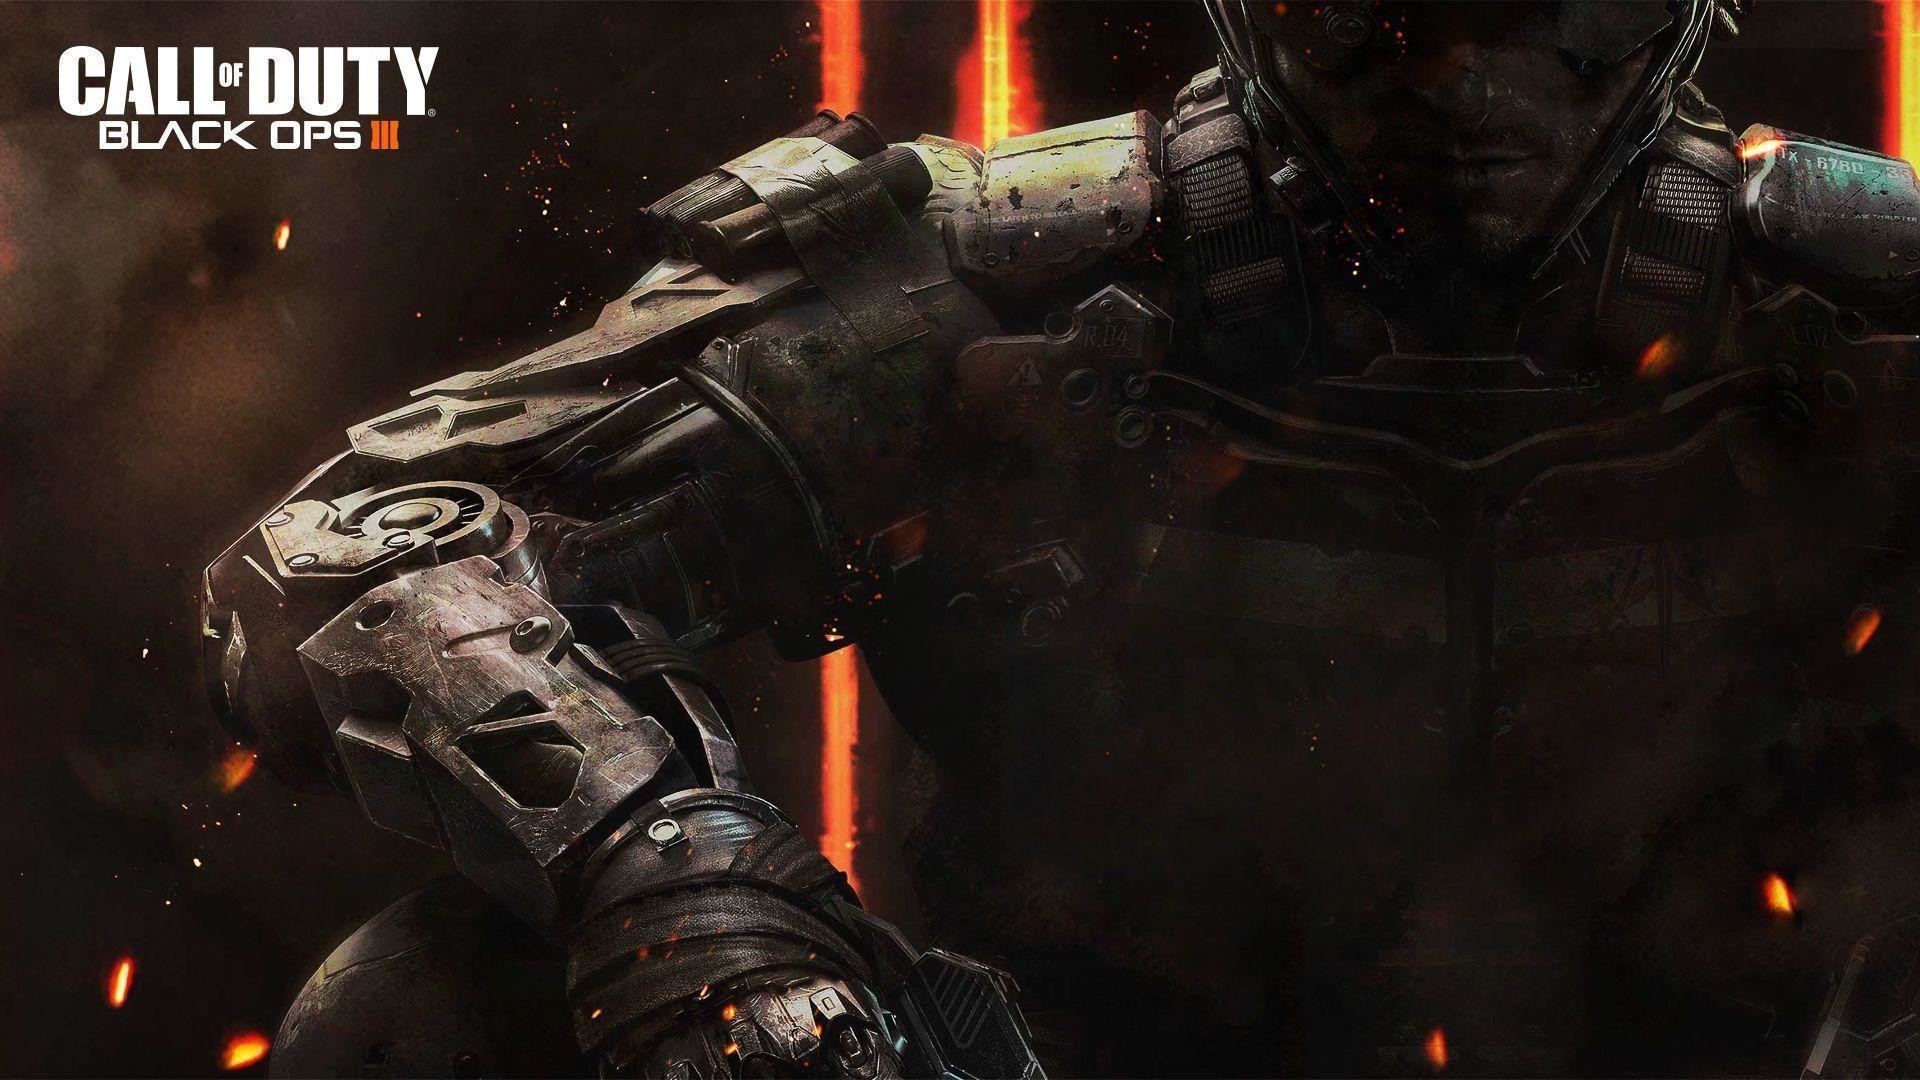 1920x1080  Black Ops 3 Wallpapers (BO3) - Free Download - Unofficial Call of  Duty